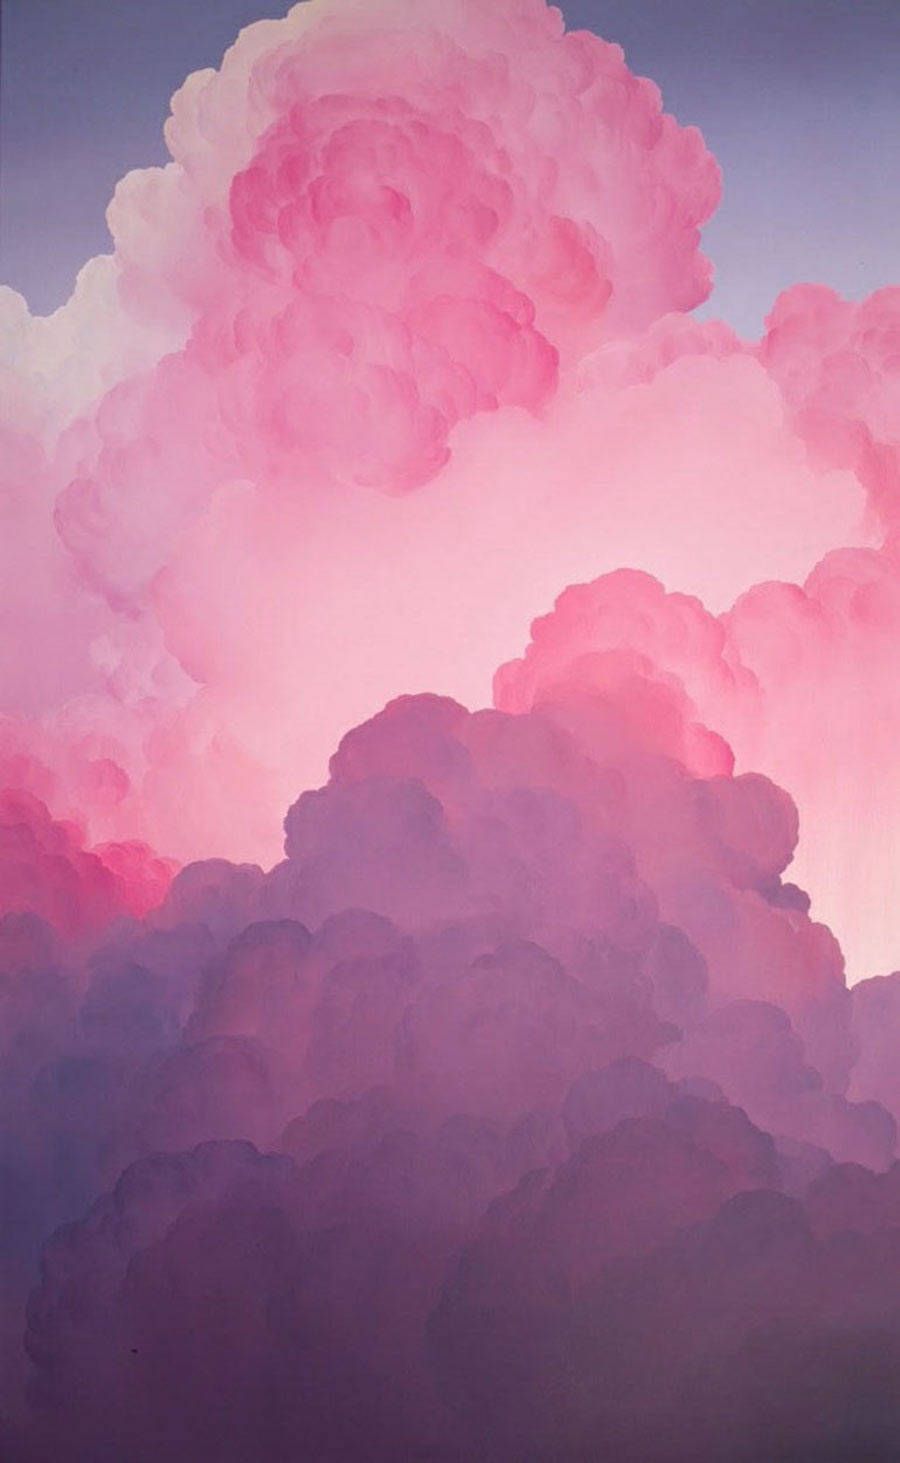 Pastel cloud background Images  Search Images on Everypixel